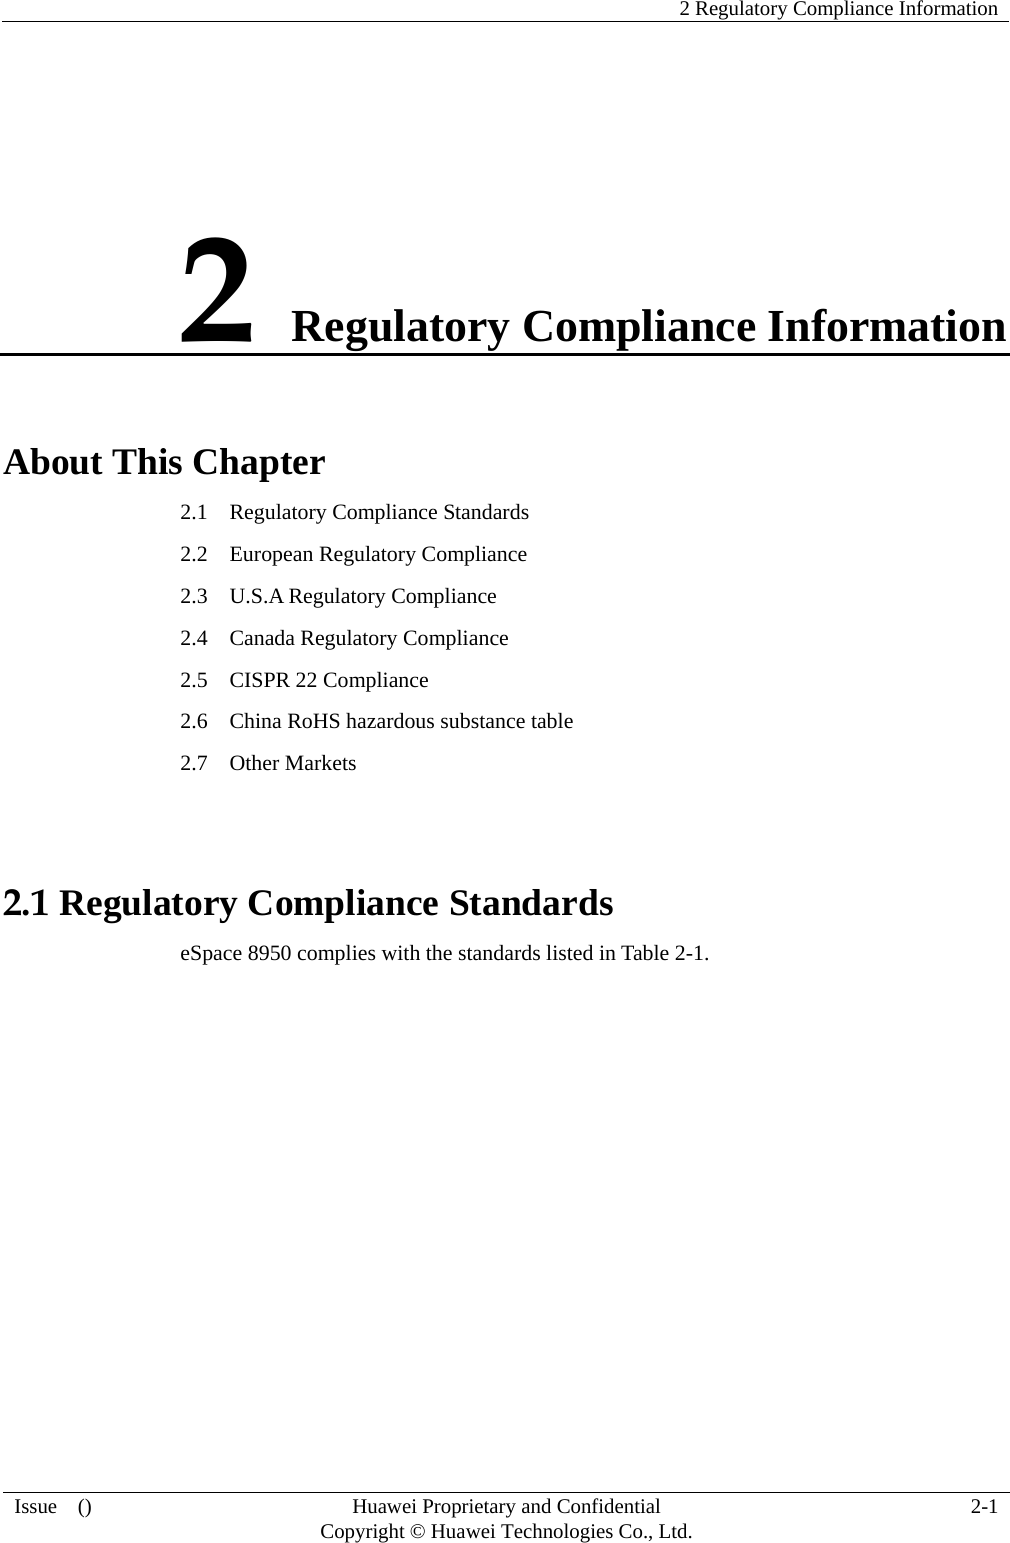    2 Regulatory Compliance Information  Issue  ()  Huawei Proprietary and Confidential     Copyright © Huawei Technologies Co., Ltd. 2-1 2 Regulatory Compliance Information About This Chapter 2.1    Regulatory Compliance Standards 2.2  European Regulatory Compliance 2.3  U.S.A Regulatory Compliance  2.4  Canada Regulatory Compliance  2.5    CISPR 22 Compliance     2.6    China RoHS hazardous substance table   2.7  Other Markets  2.1 Regulatory Compliance Standards eSpace 8950 complies with the standards listed in Table 2-1. 